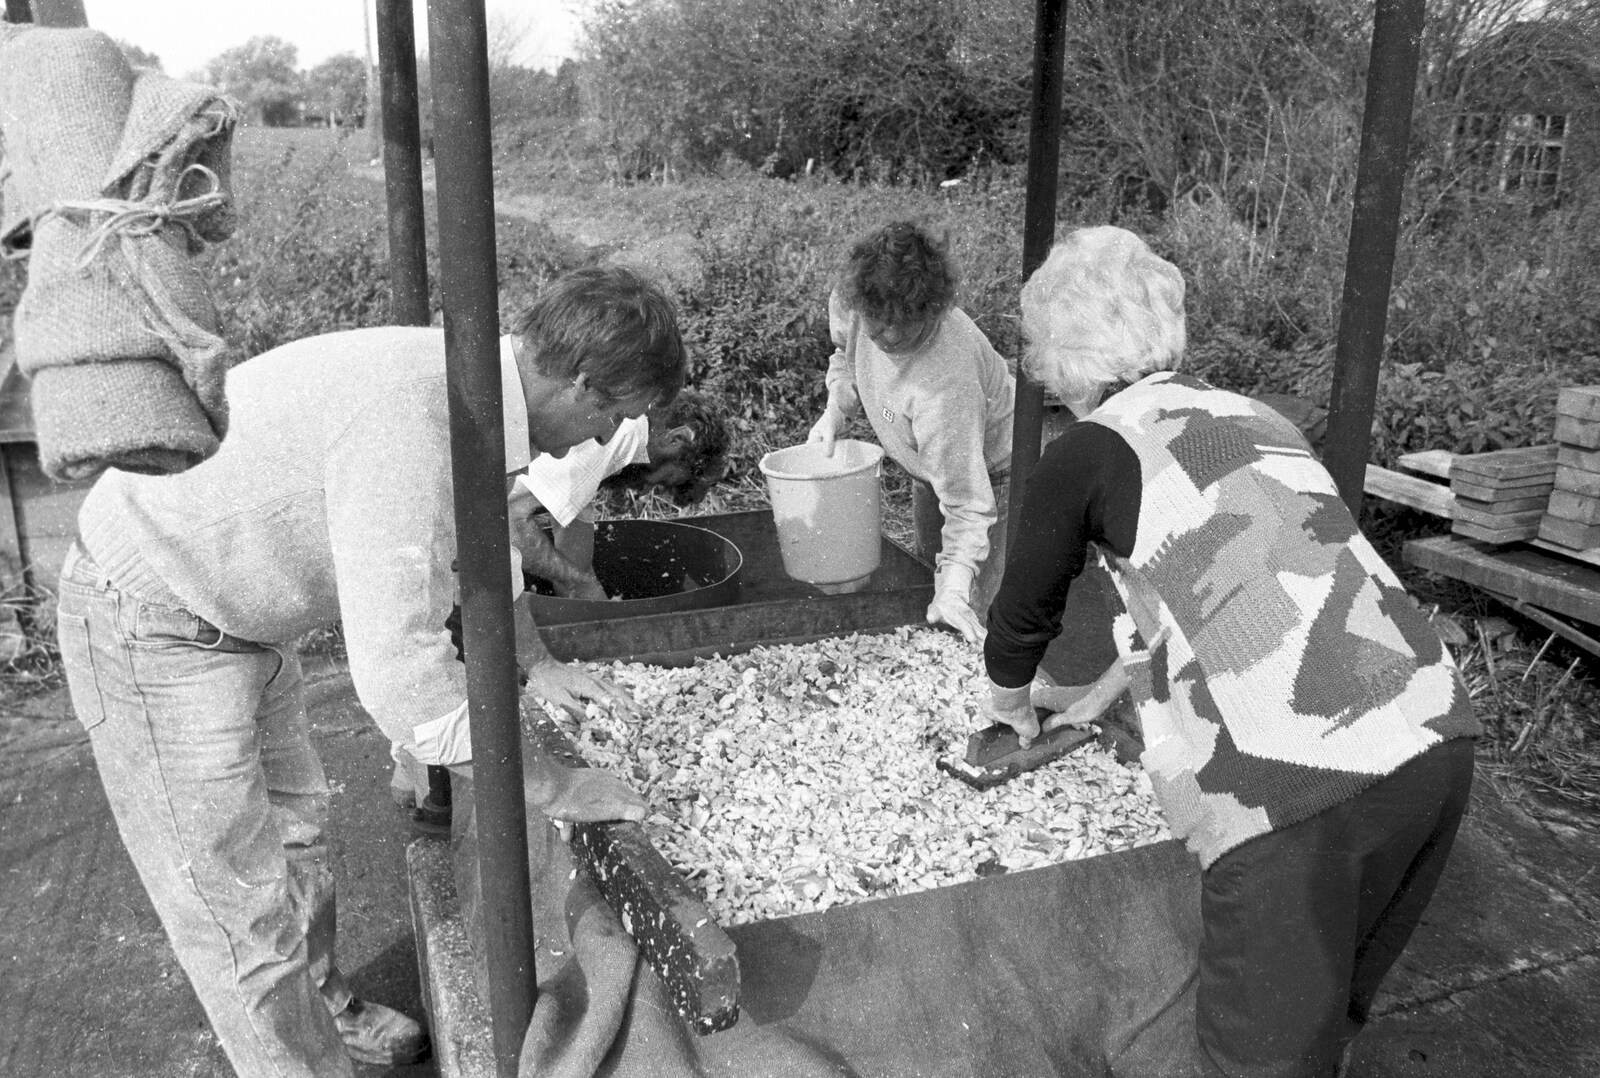 A cheese is made from Cider Making in Black and White, Stuston, Suffolk - 11th October 1992